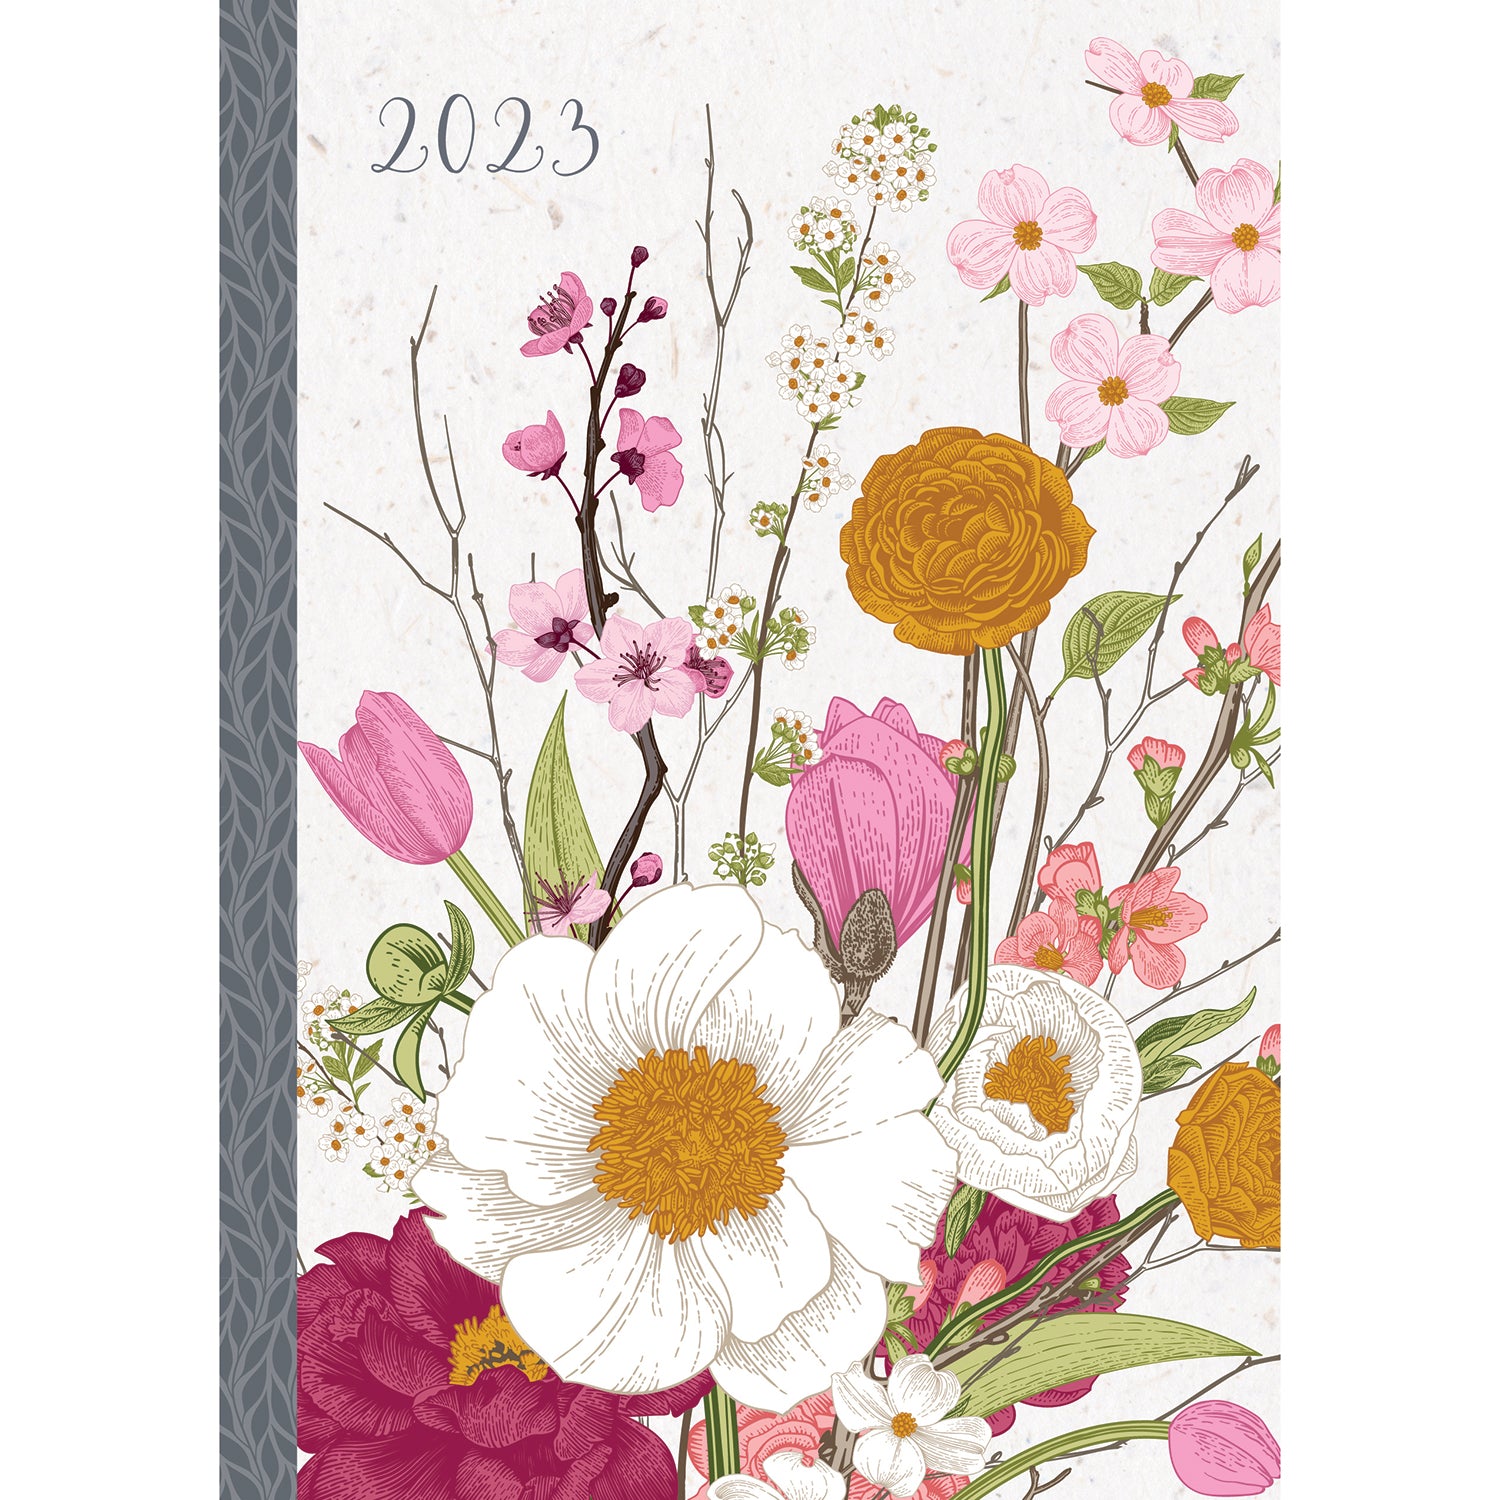 Botanicals - 2023 A5 Padded Cover Diary Premium Planner Book Xmas New Year Gift - Zmart Australia